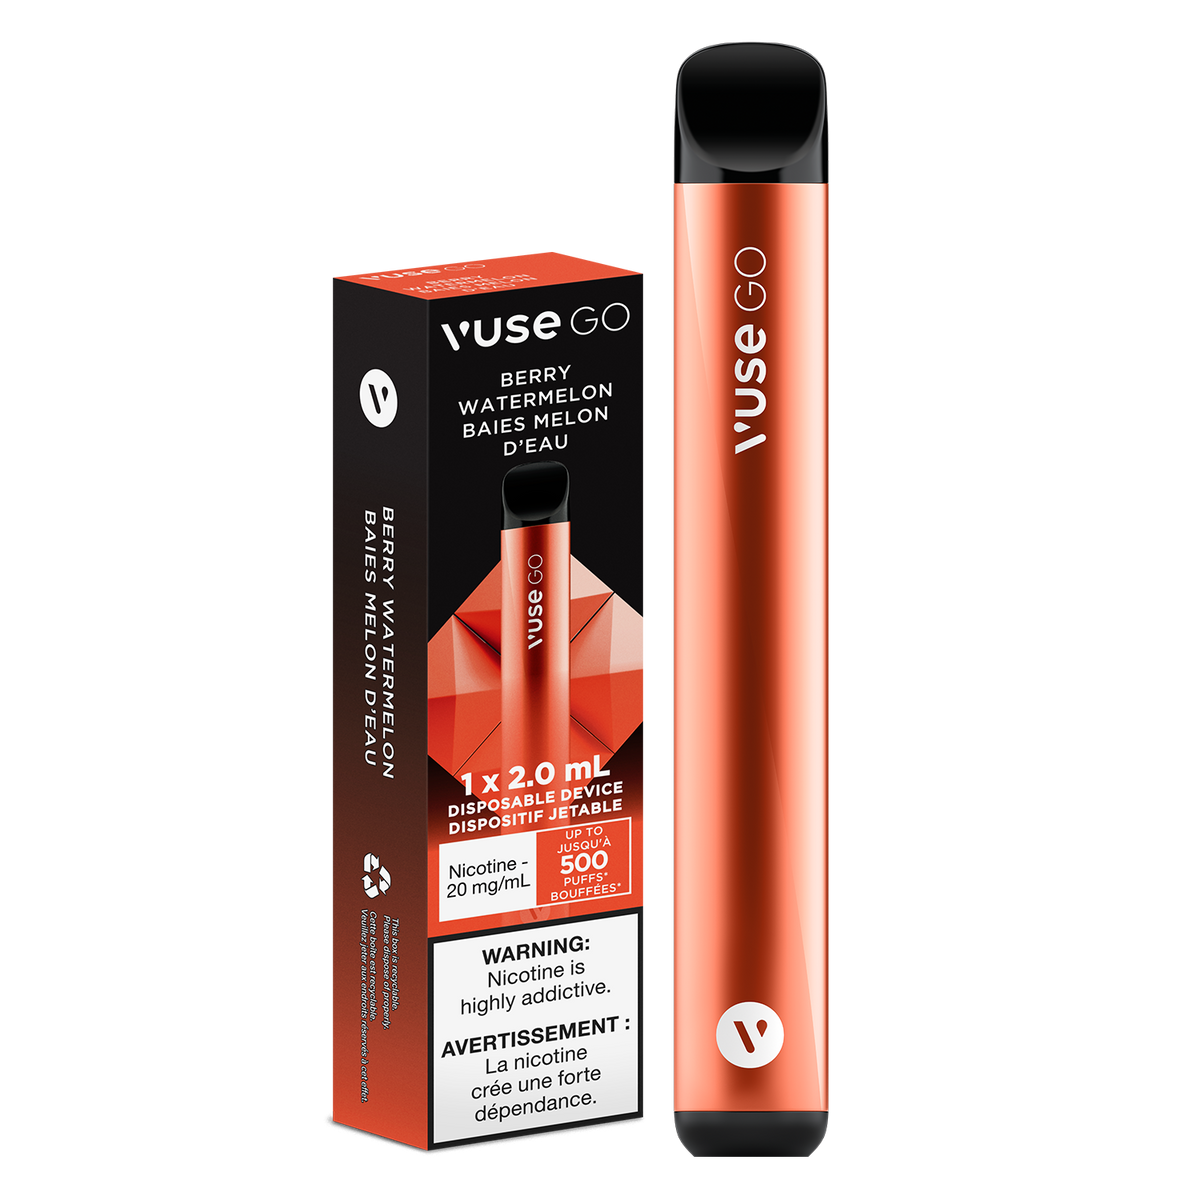 EXCISE TAX VUSE GO DISPOSABLE BERRY WATERMELON MISTER VAPOR CANADA